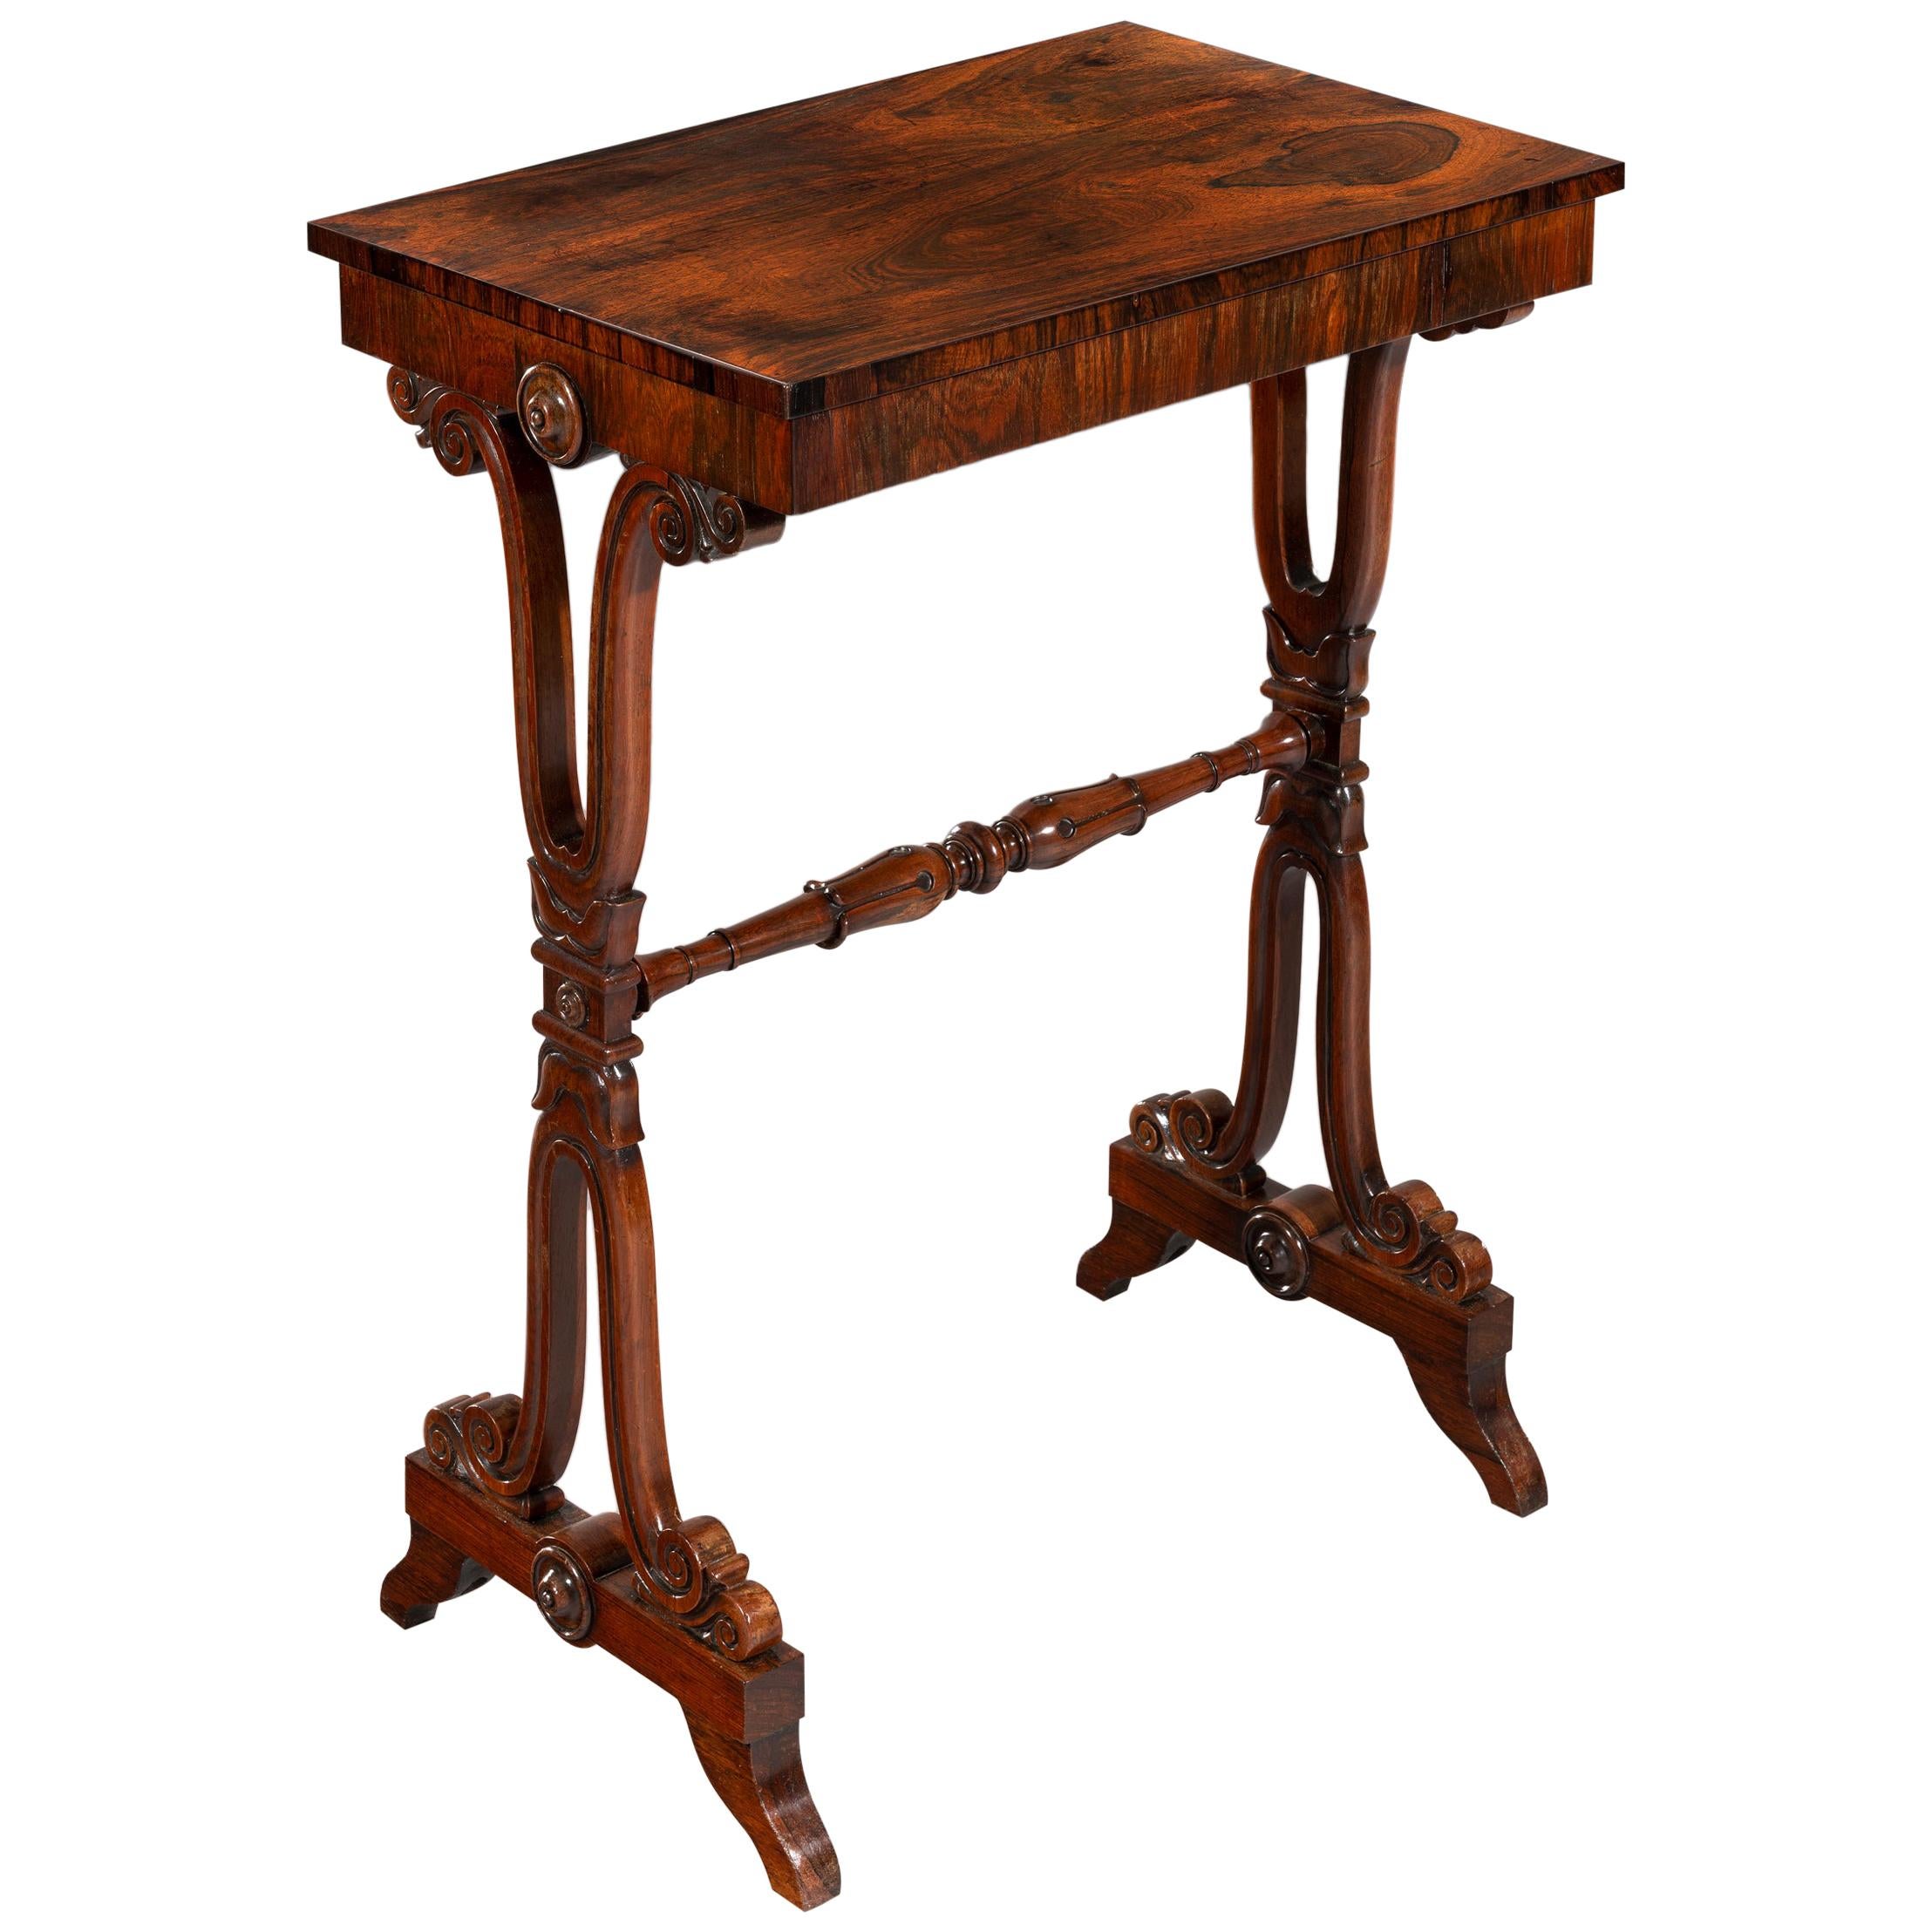 Late Regency Period George IV Figured Walnut Occasional Side Table